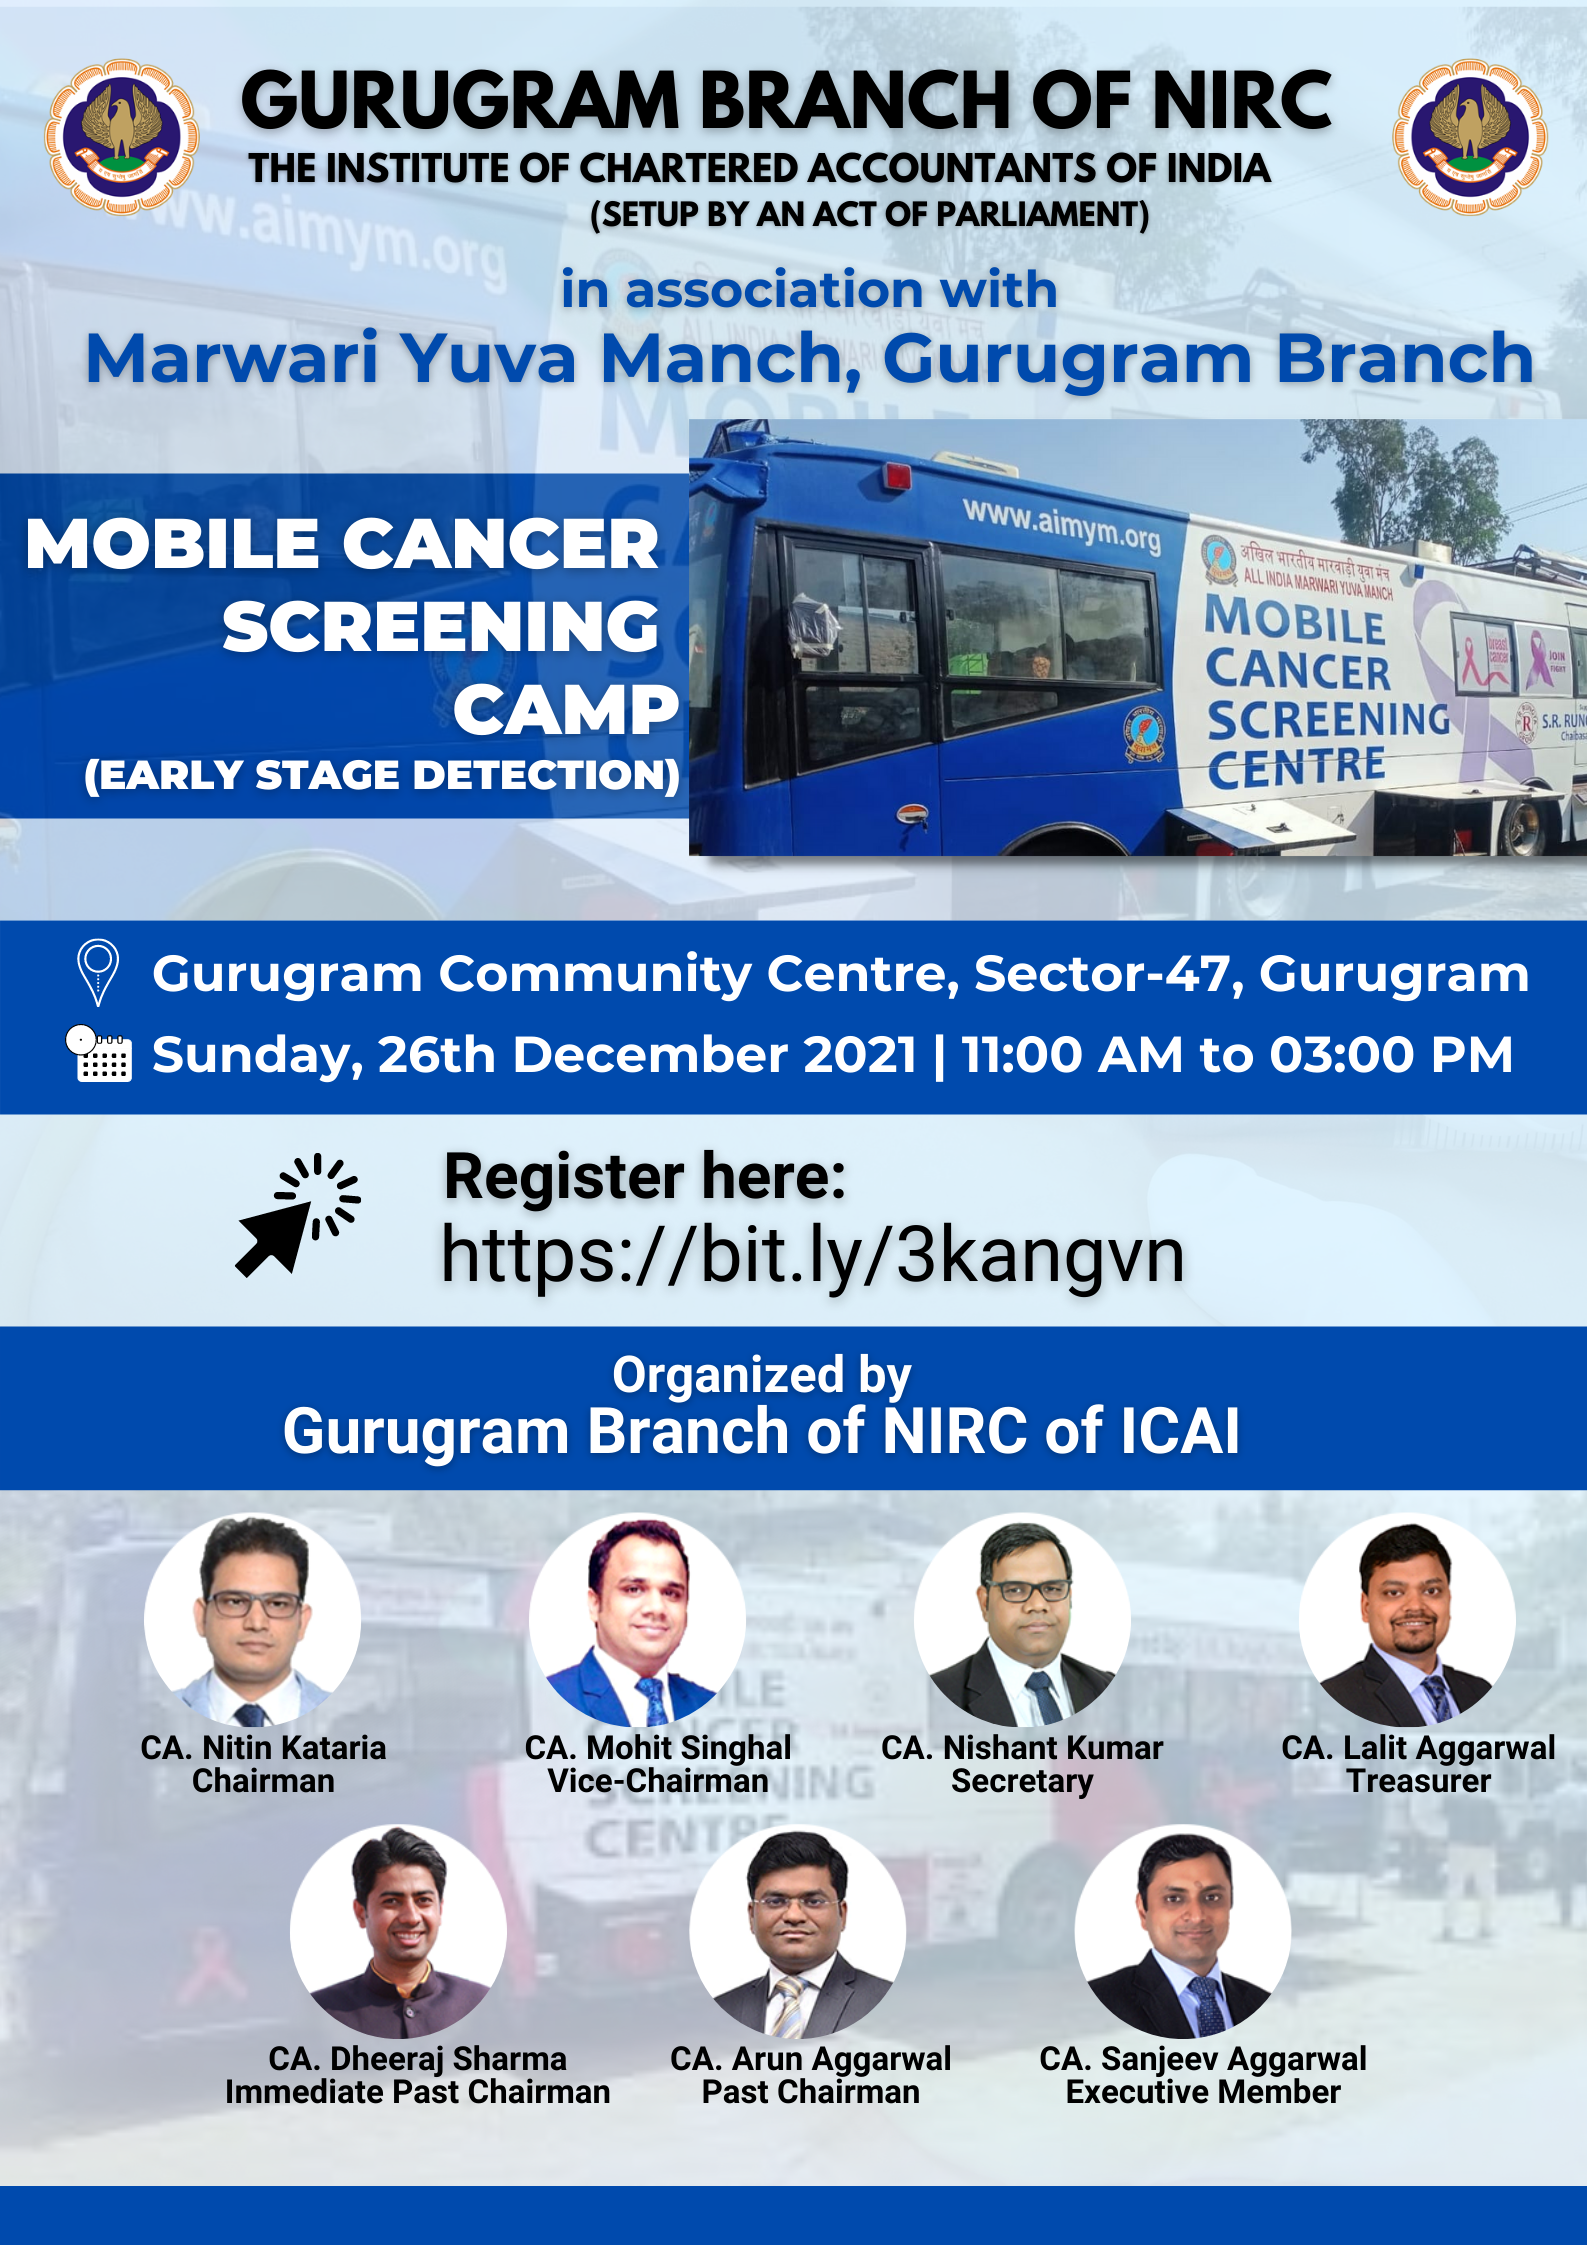 Mobile Cancer Screening Camp, Complete Health Checkup and Blood Donation Camp